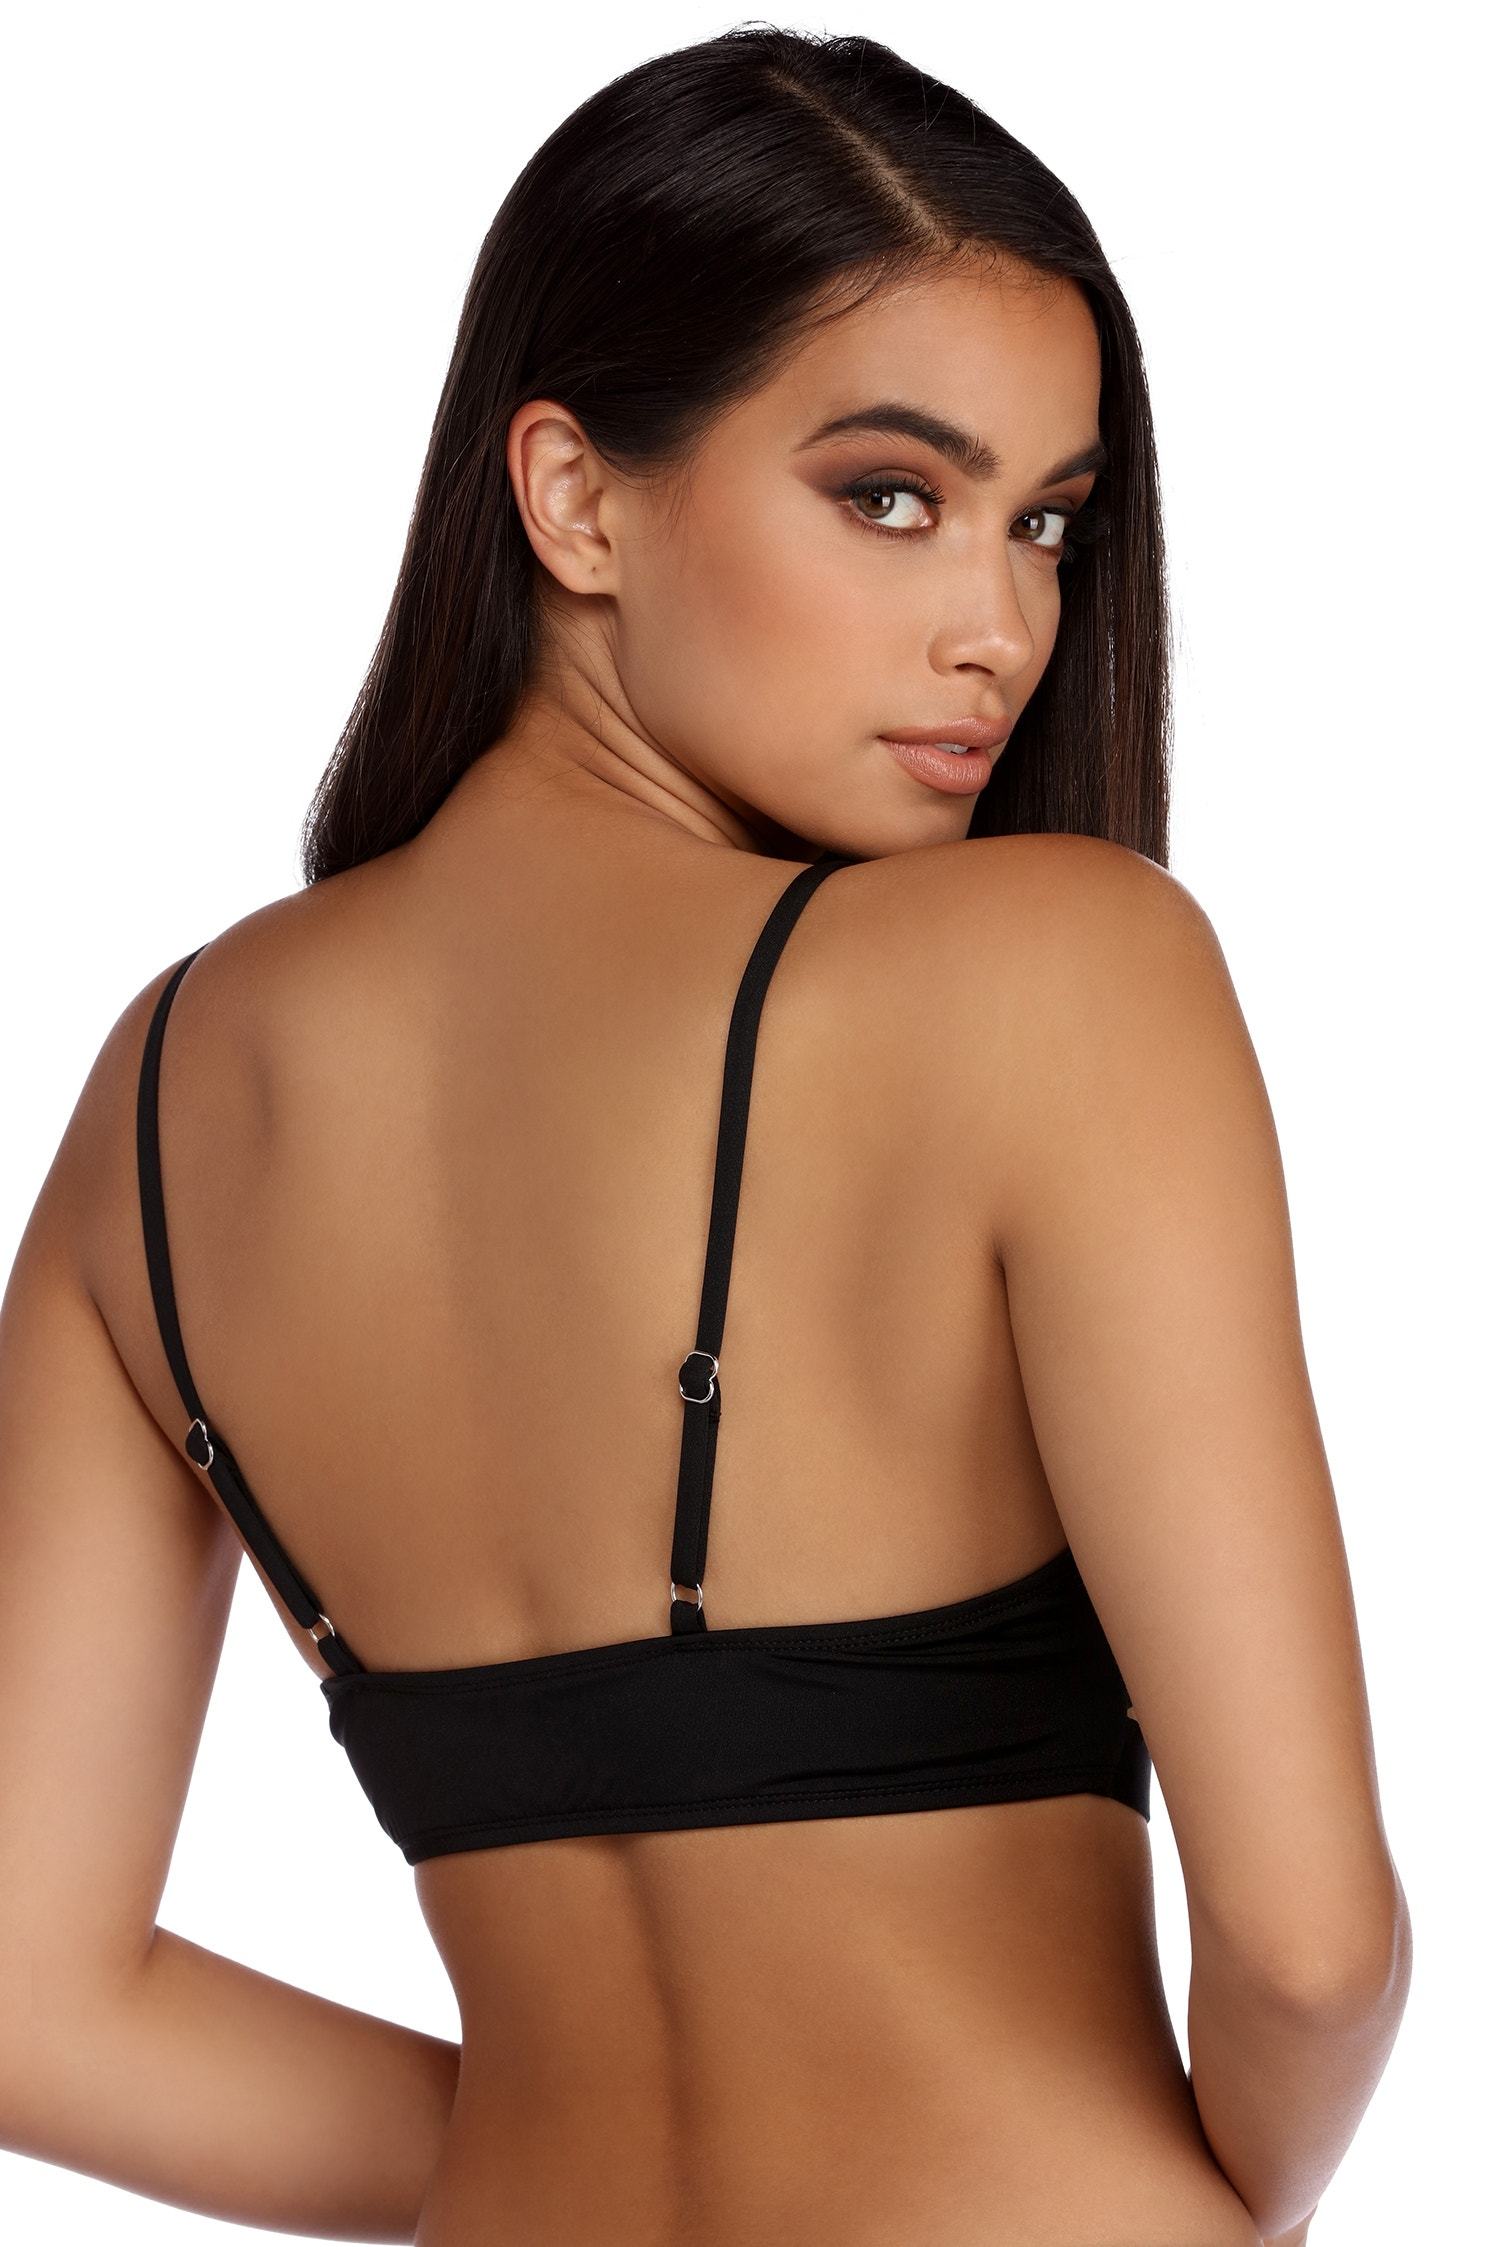 Cut To The Chase Swim Top - Lady Occasions